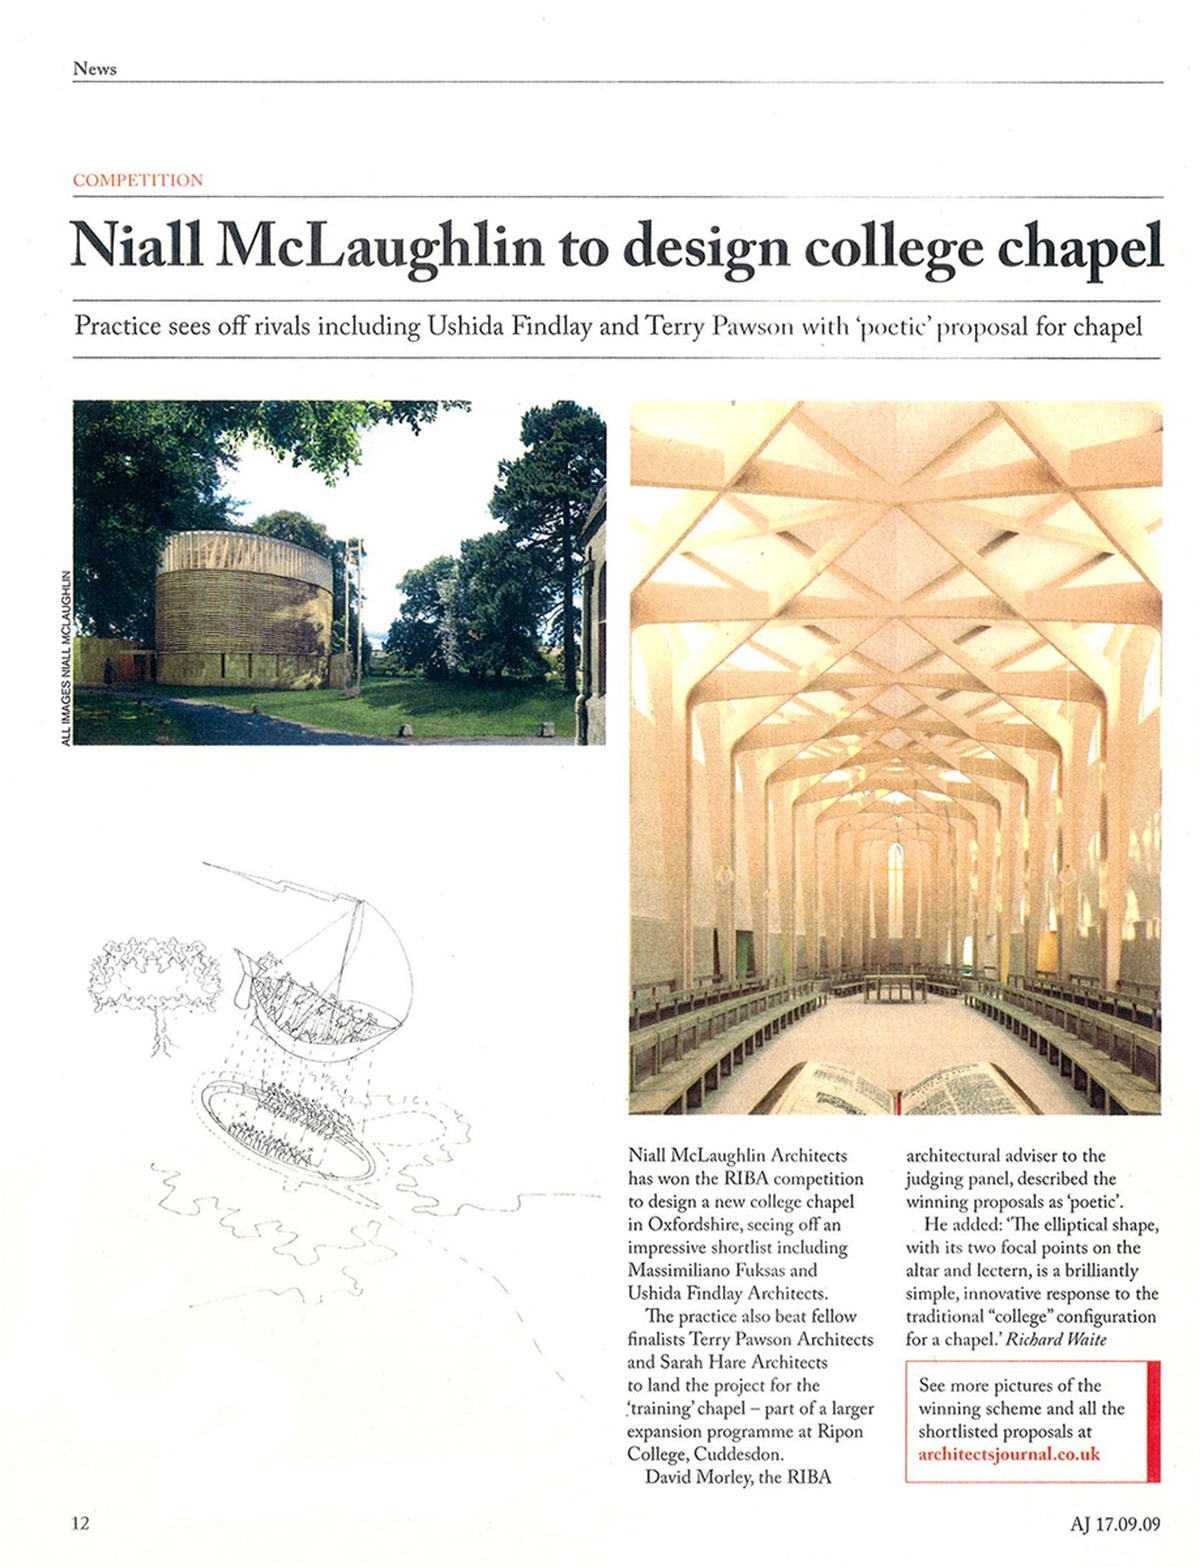 Níall McLaughlin to design College Chapel - Architects’ Journal